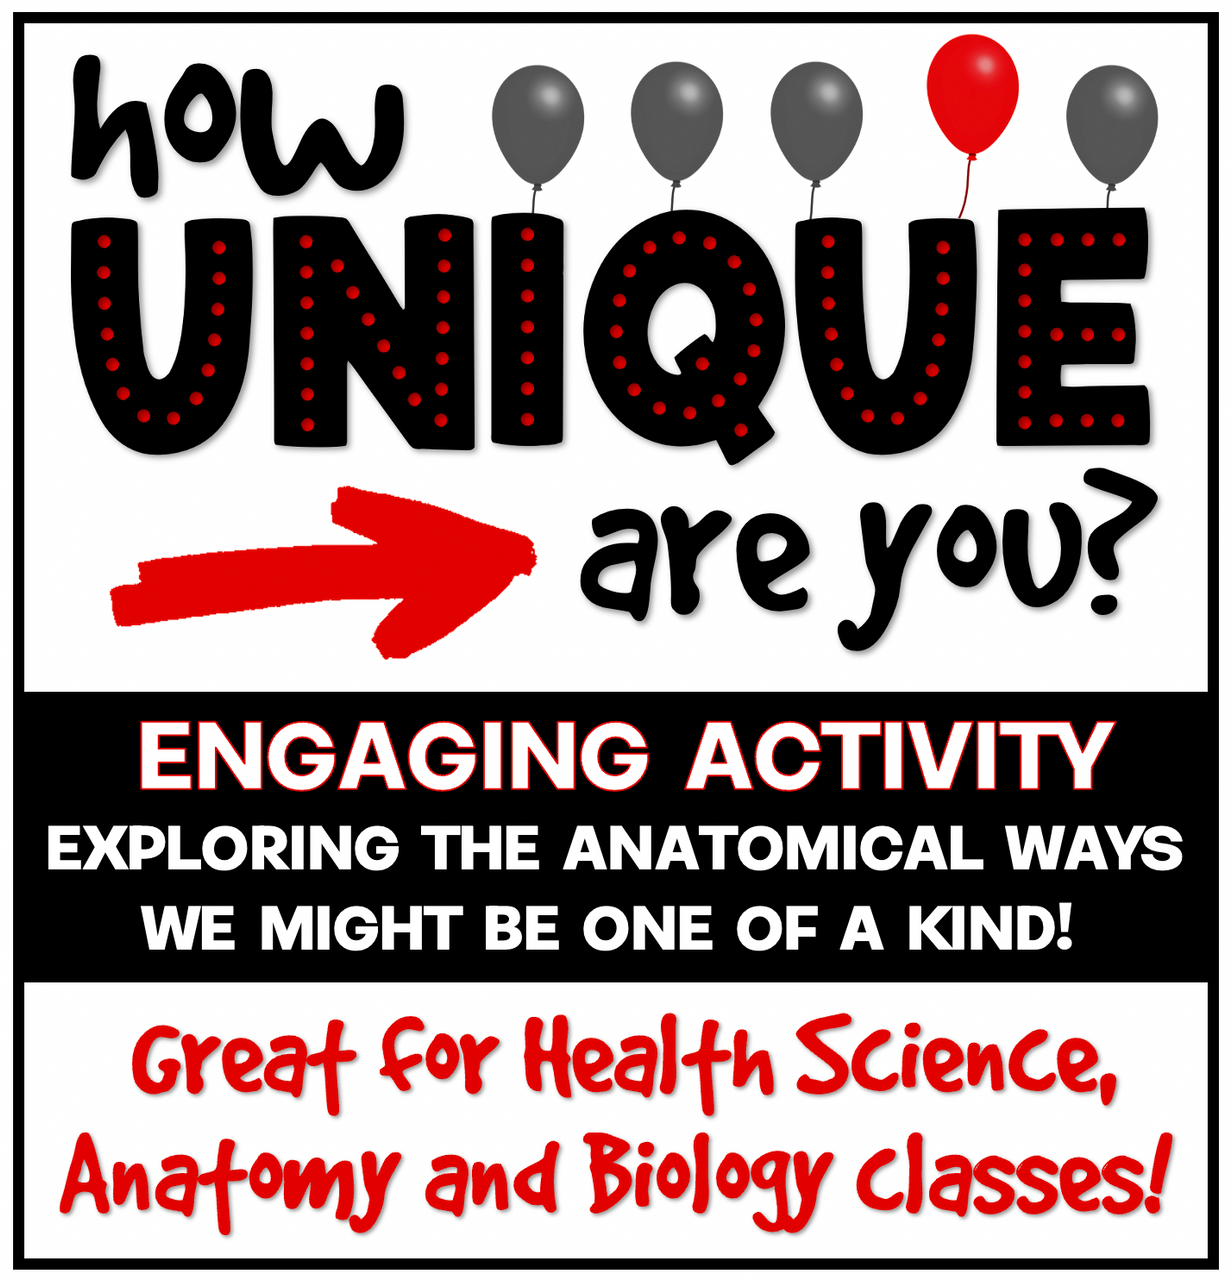 WHAT MAKES YOU UNIQUE? Exploring Anatomical Ways That Make Us One of a Kind!